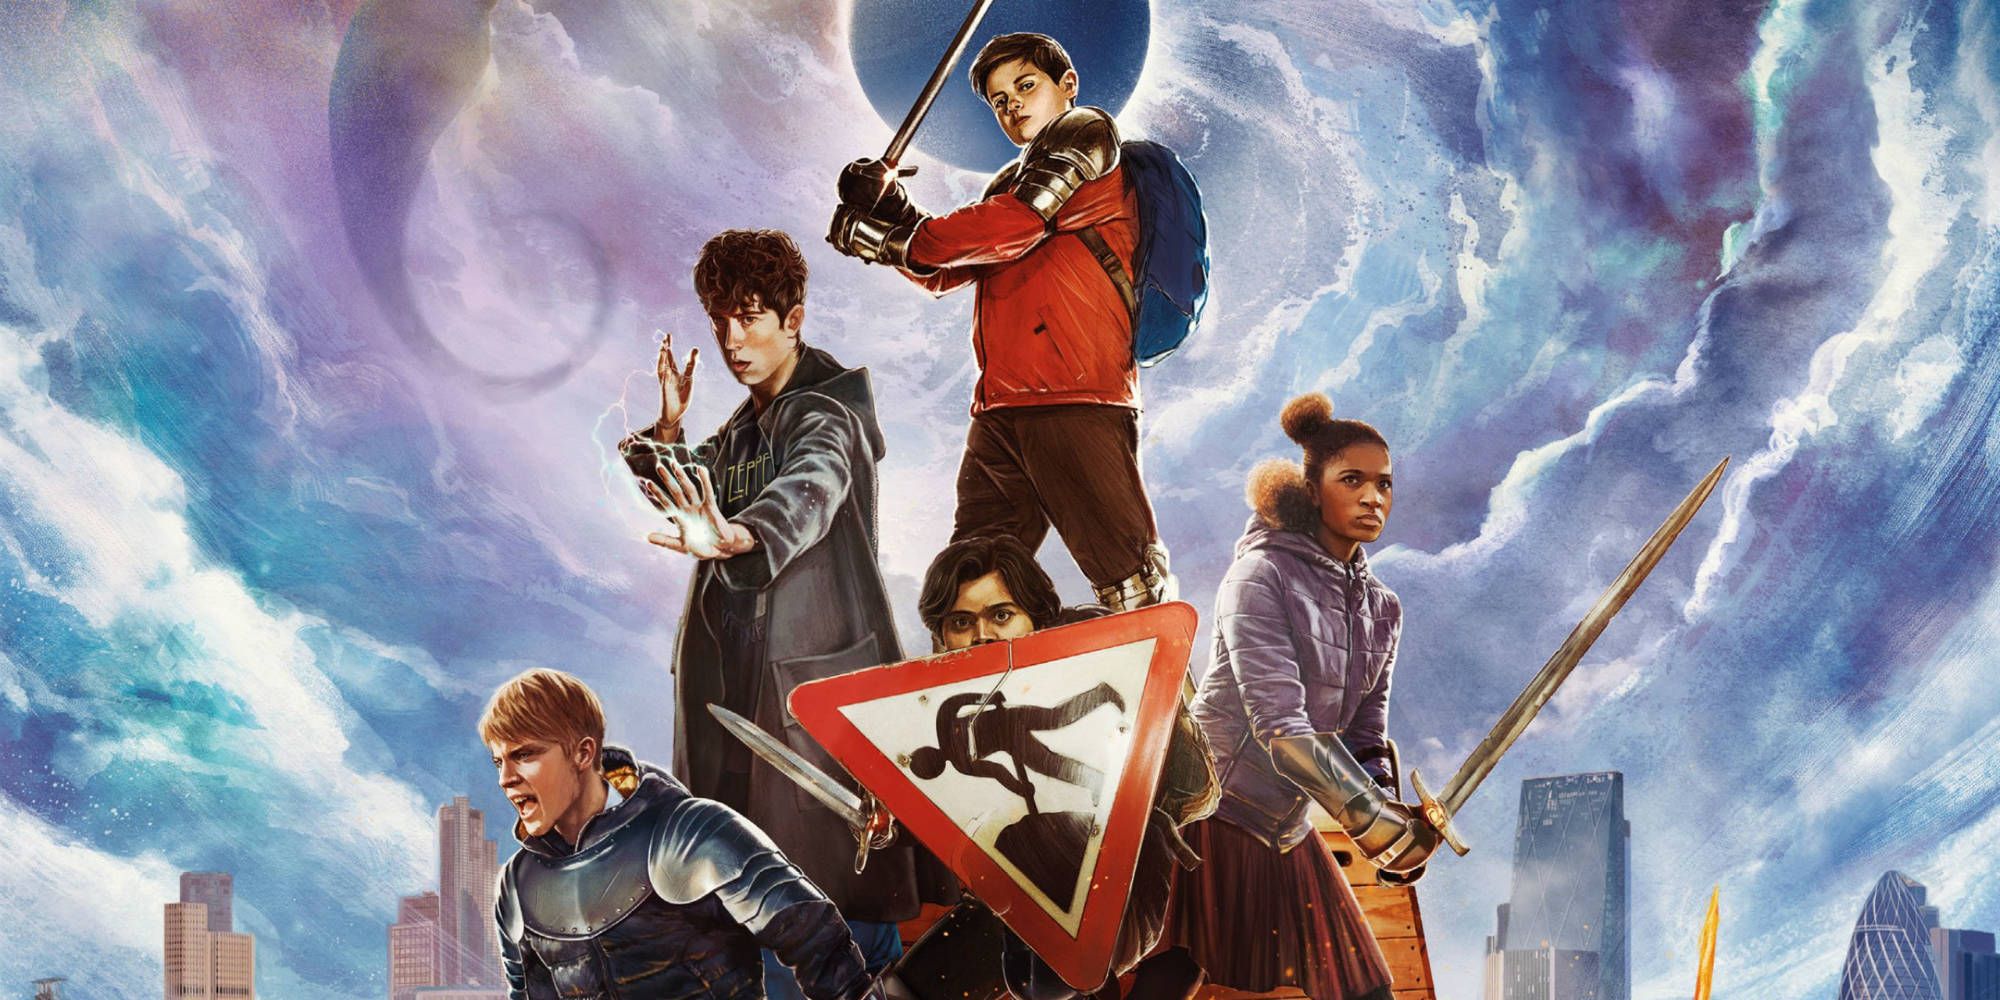 Children stand ready for battle in The Kid Who Would Be King poster